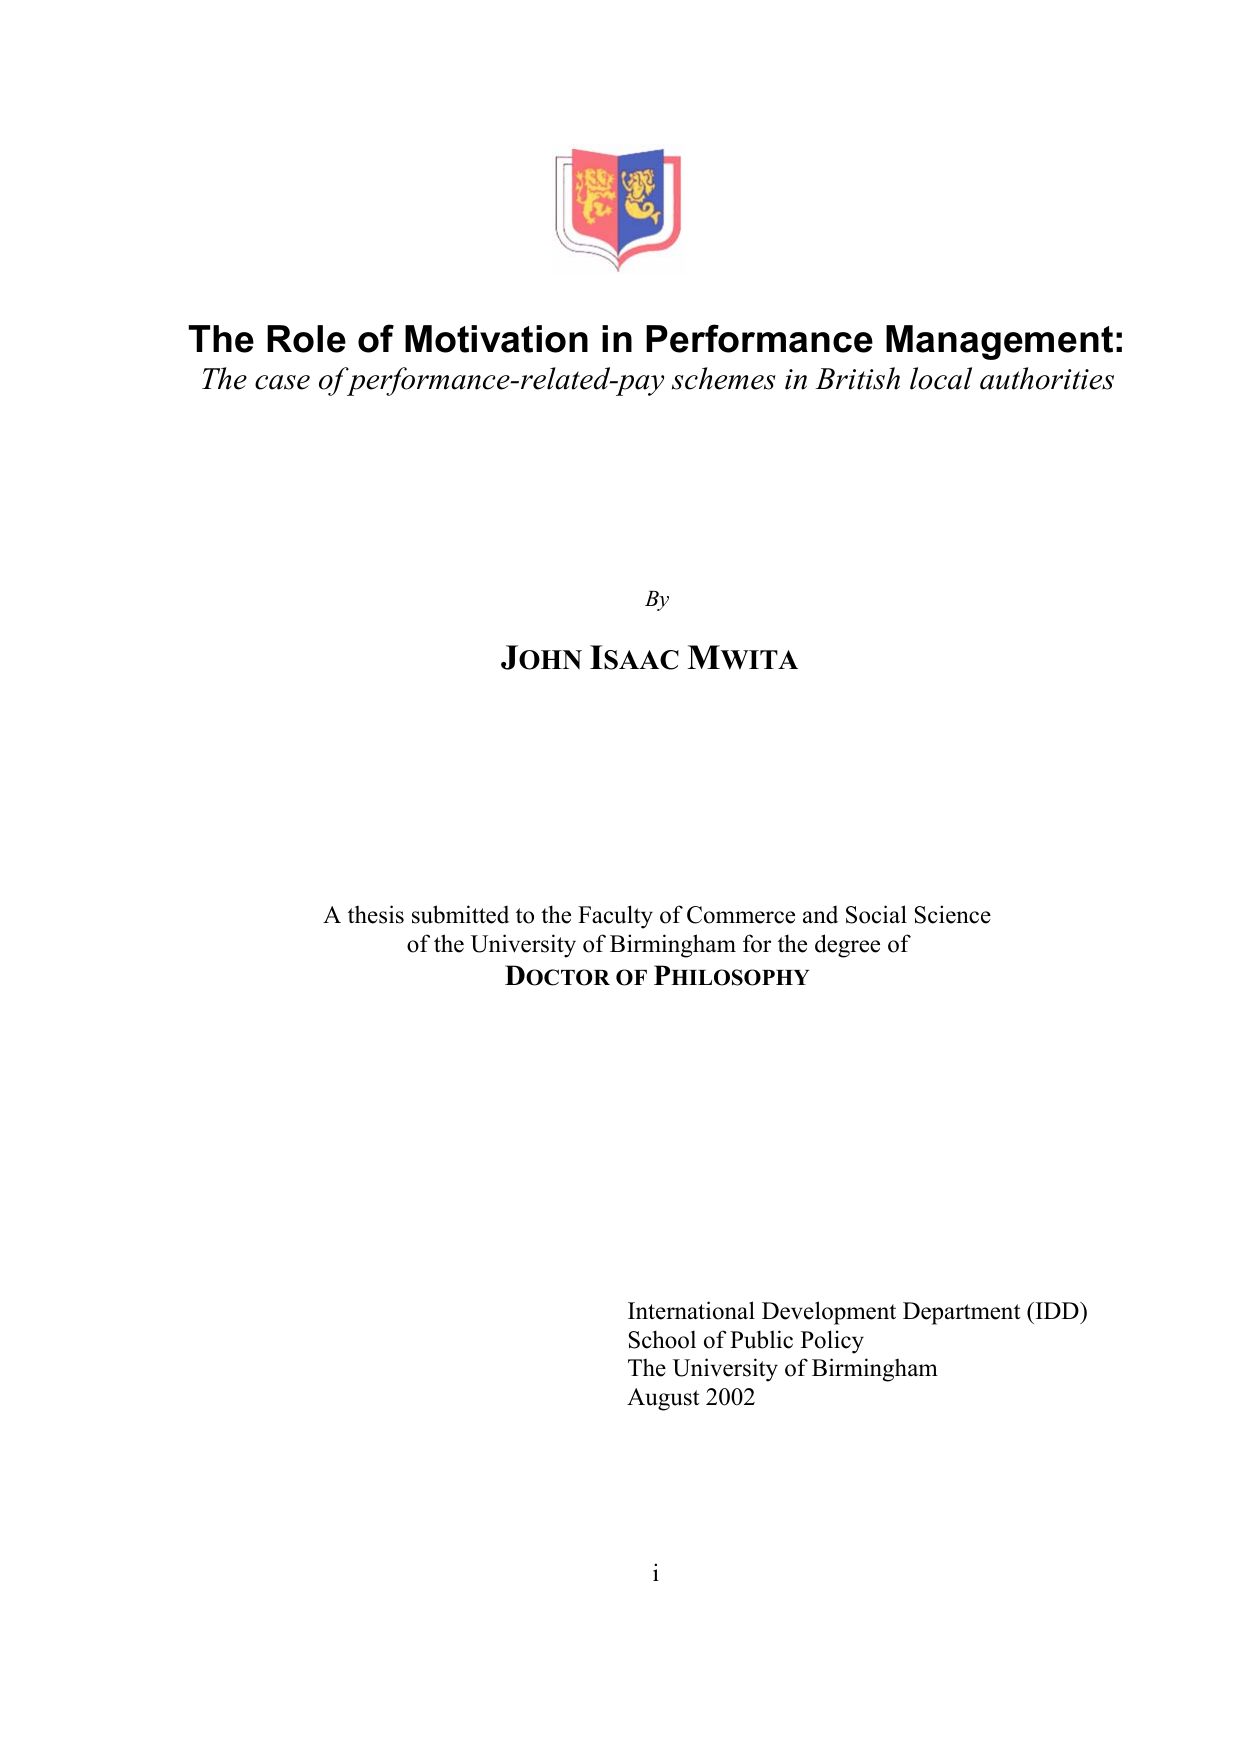 thesis about business performance